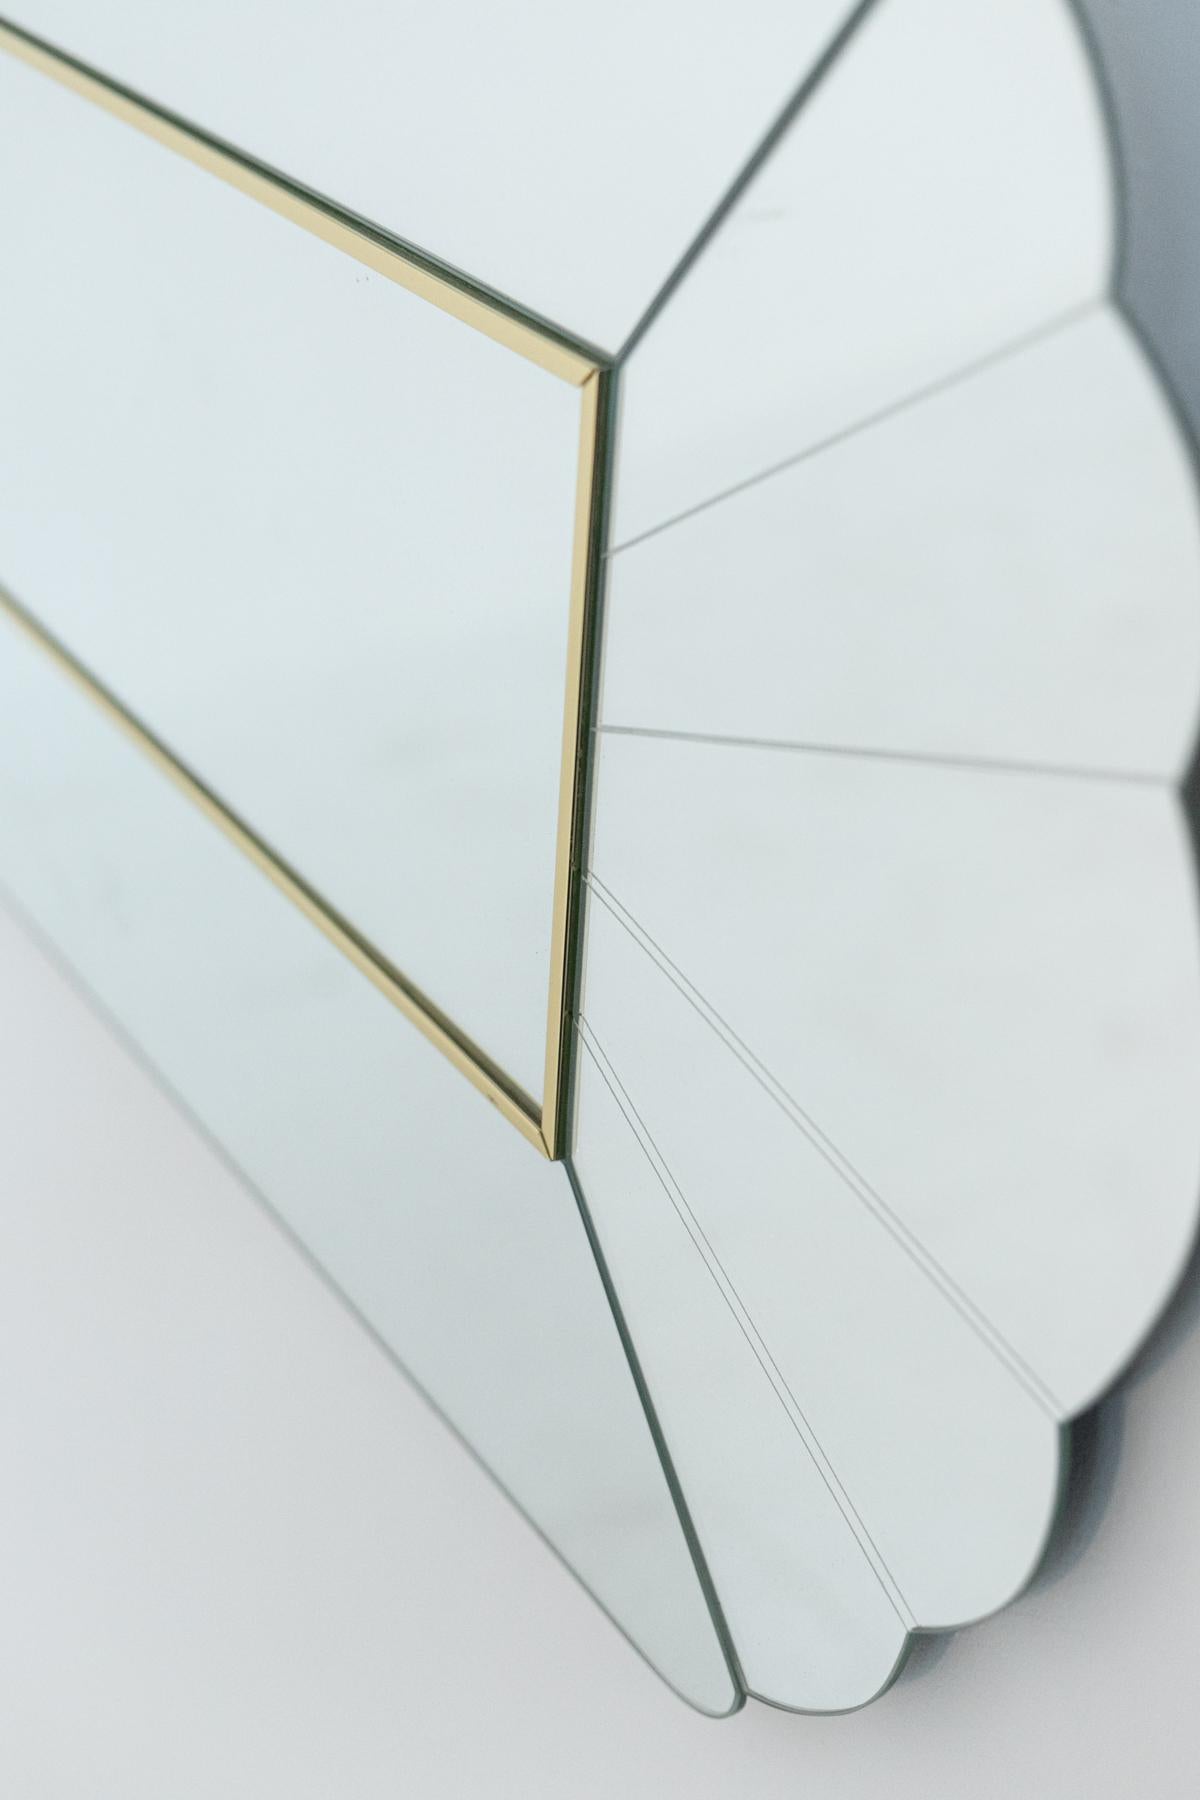 Late 20th Century Lovely Wall Mirror by Alain Delon for Maison Jansen